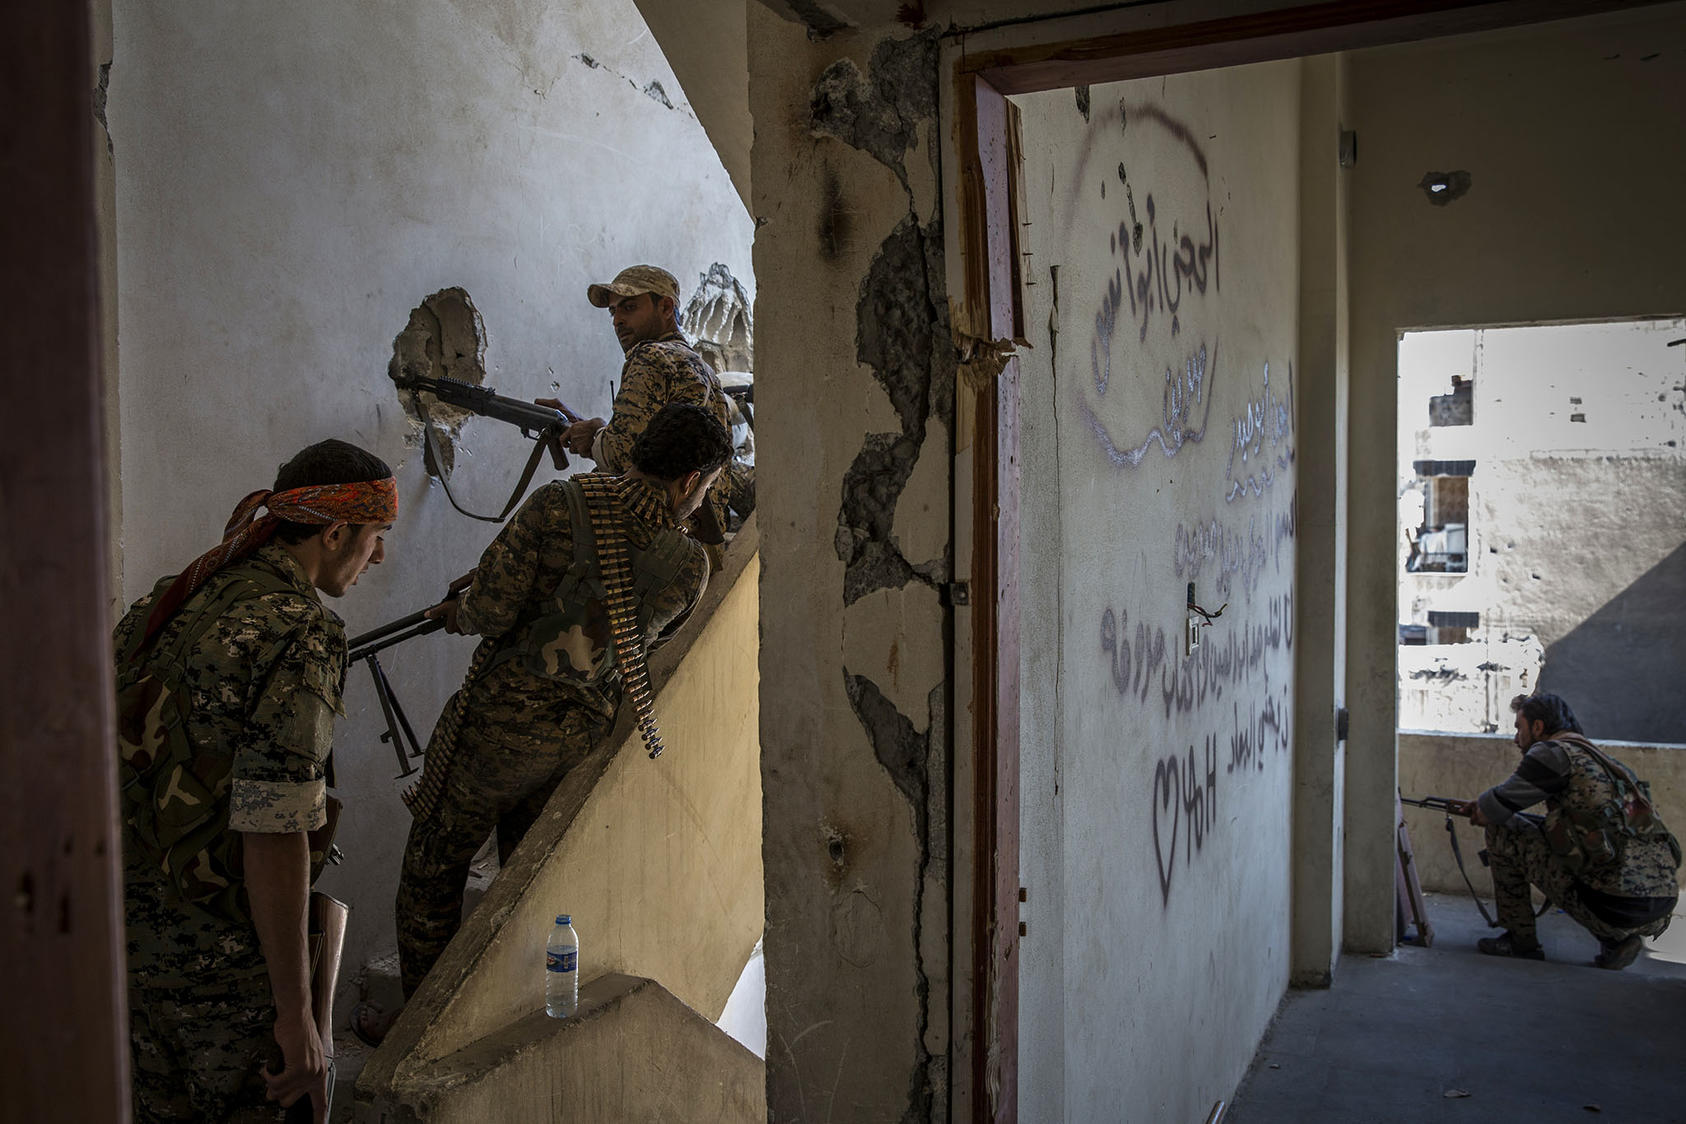 Members of the Syrian Democratic Forces monitor and fire at what they believed were Islamic State fighters in Raqqa, Syria, Oct. 12, 2017. (Ivor Prickett/The New York Times)